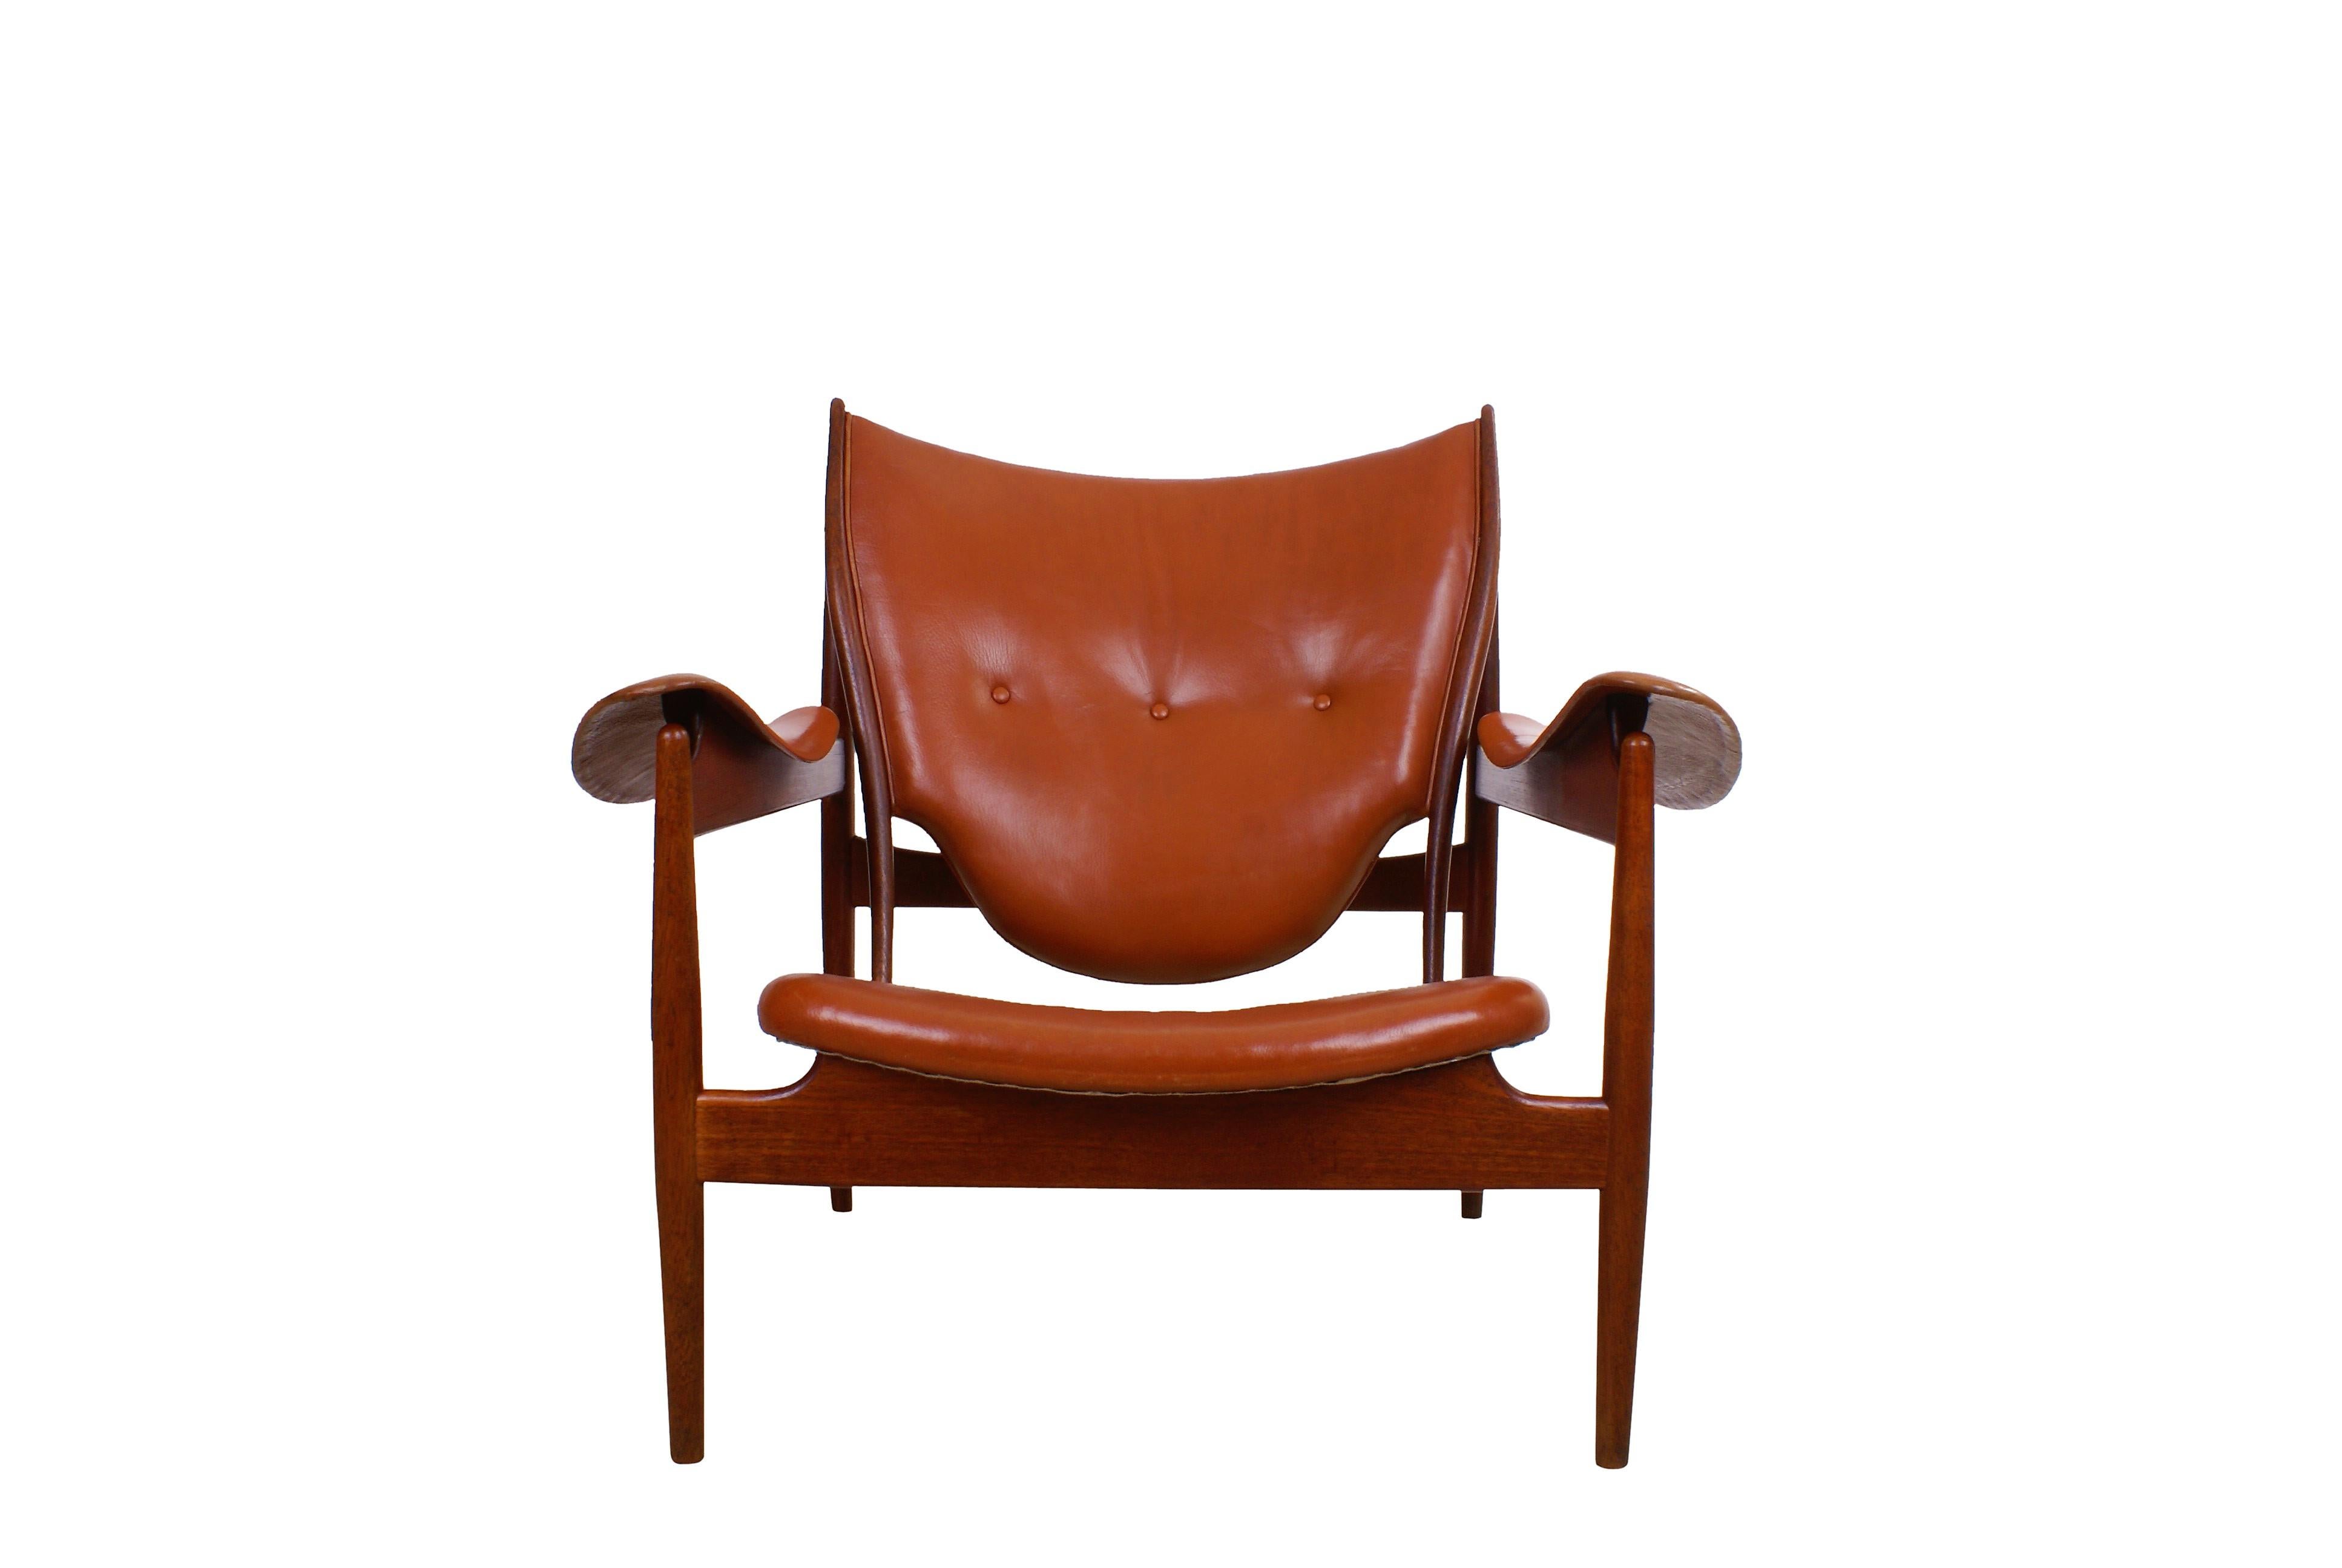 Danish Finn Juhl Rare 'Chieftain' Chair in Teak and Leather for Niels Vodder, 1949 For Sale